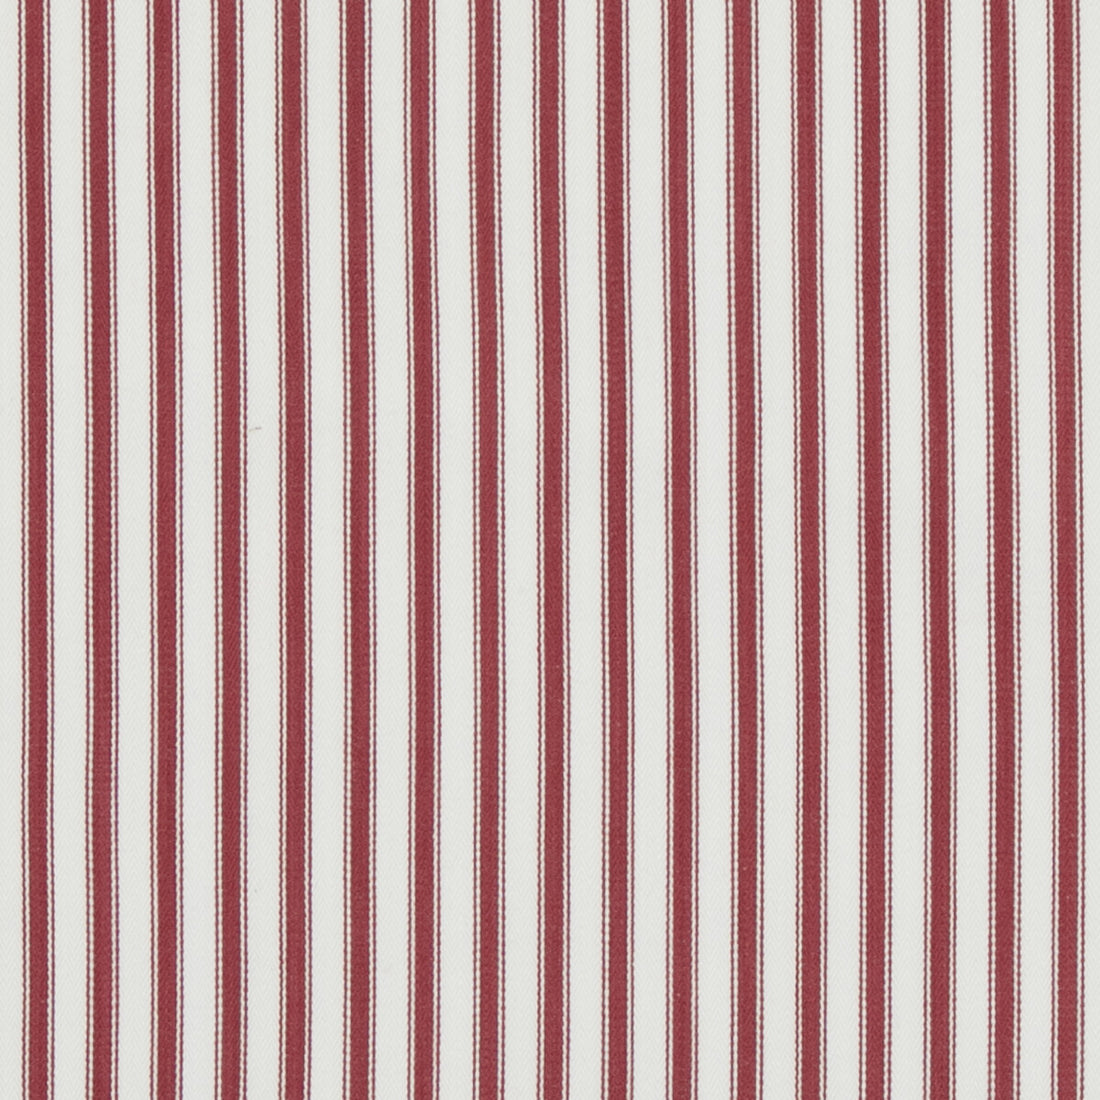 Sherborne Ticking fabric in red color - pattern PF50505.450.0 - by Baker Lifestyle in the Bridport collection